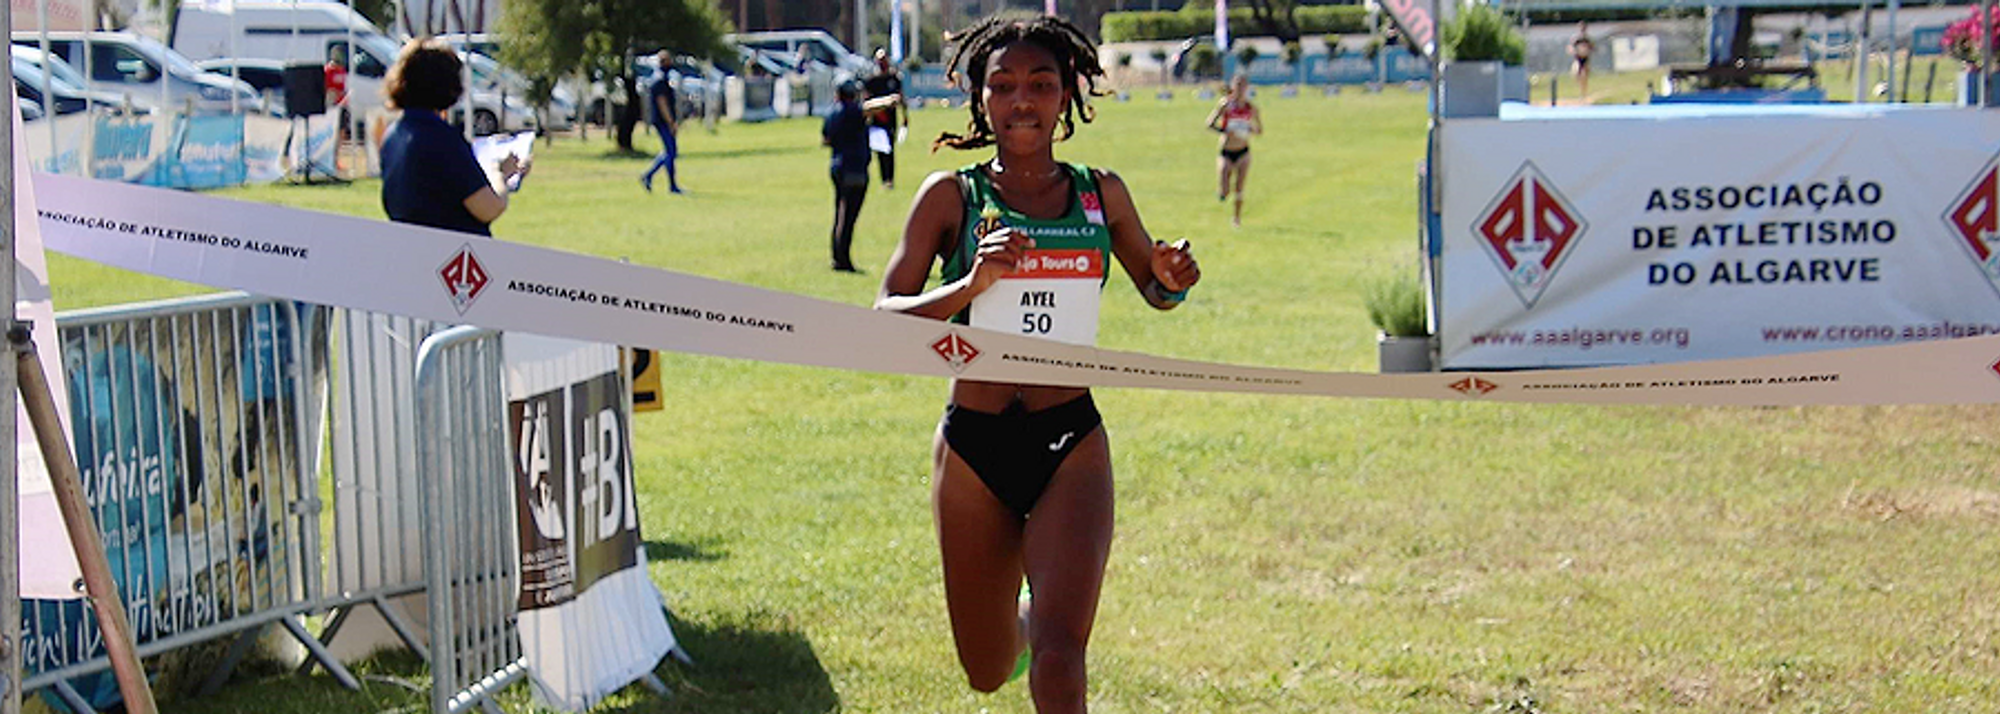 Ethiopia’s Likina Amebaw, Sweden’s Sarah Lahti and Yann Schrub of France will be among the athletes targeting a strong final performance as the World Athletics Cross Country Tour Gold season comes to a close